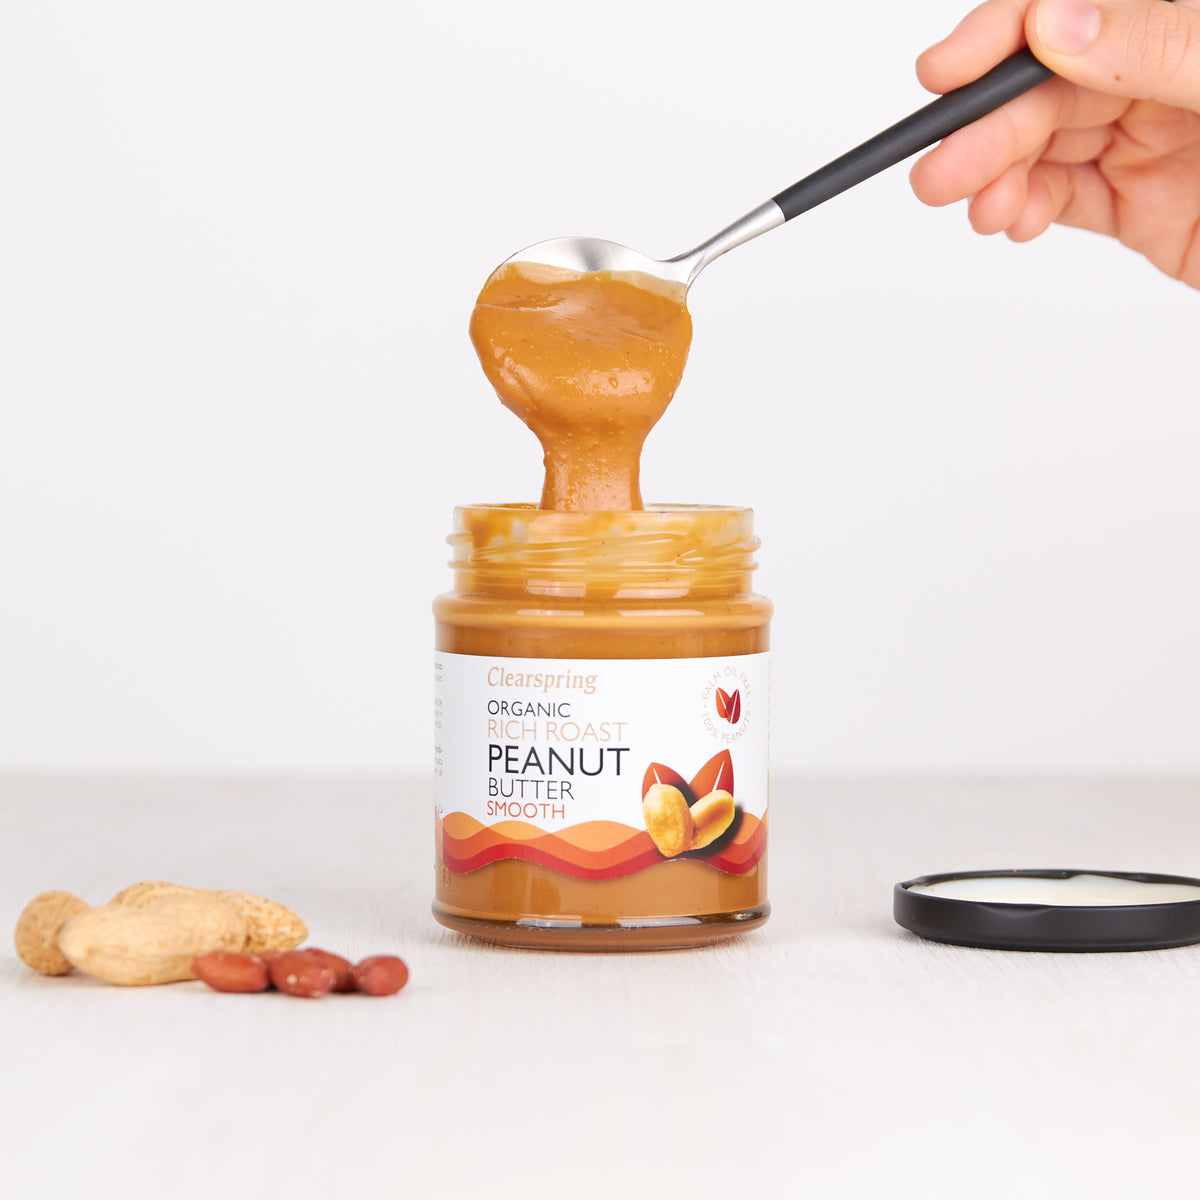 Clearspring Organic Rich Roast Peanut Butter - Smooth